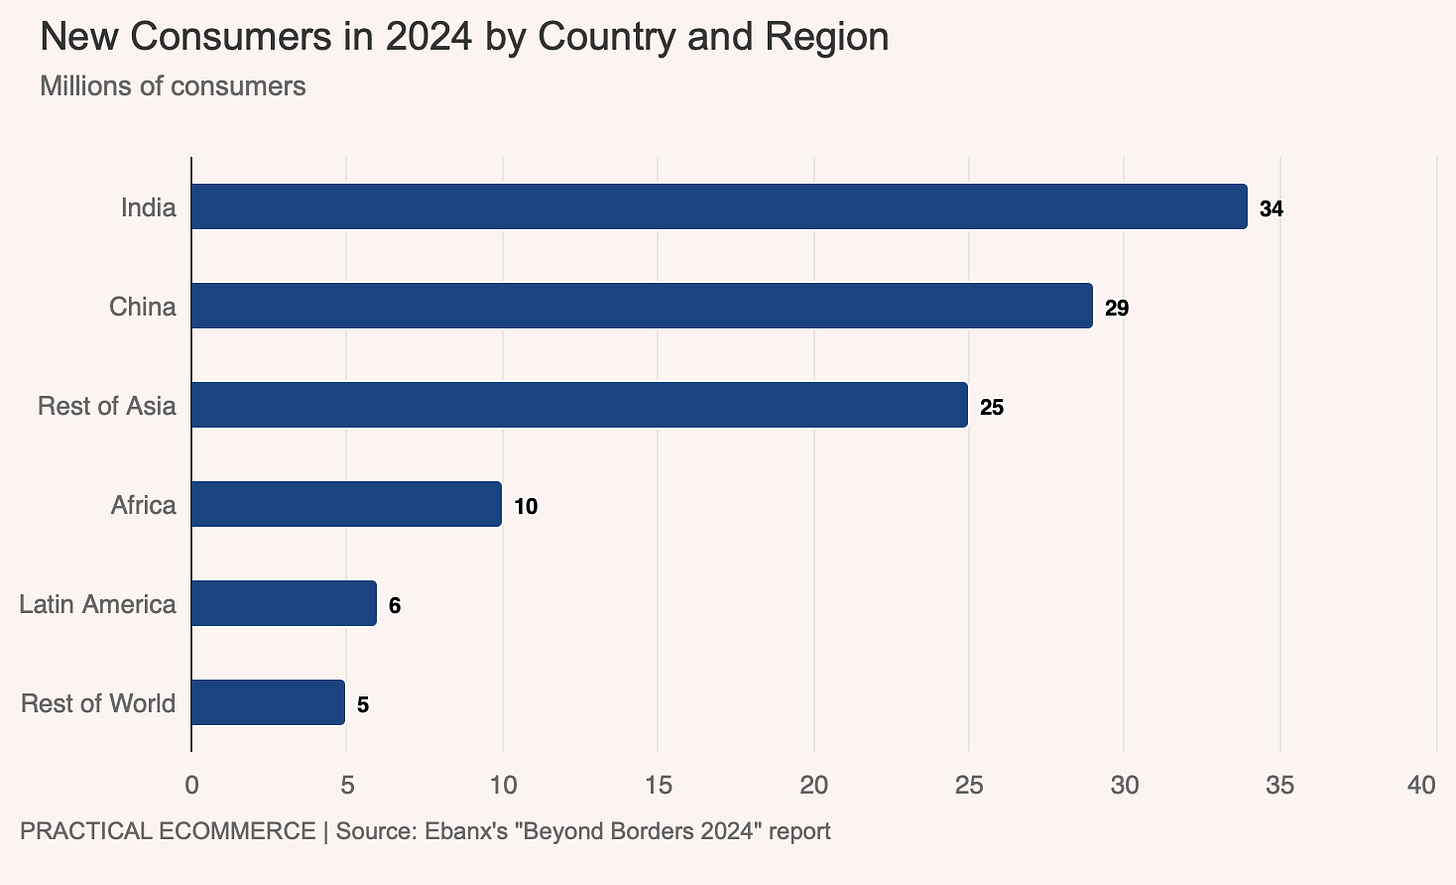 New Consumers in 2024 by Country and Region as per the Ebanx's "Beyond Borders 2024" report